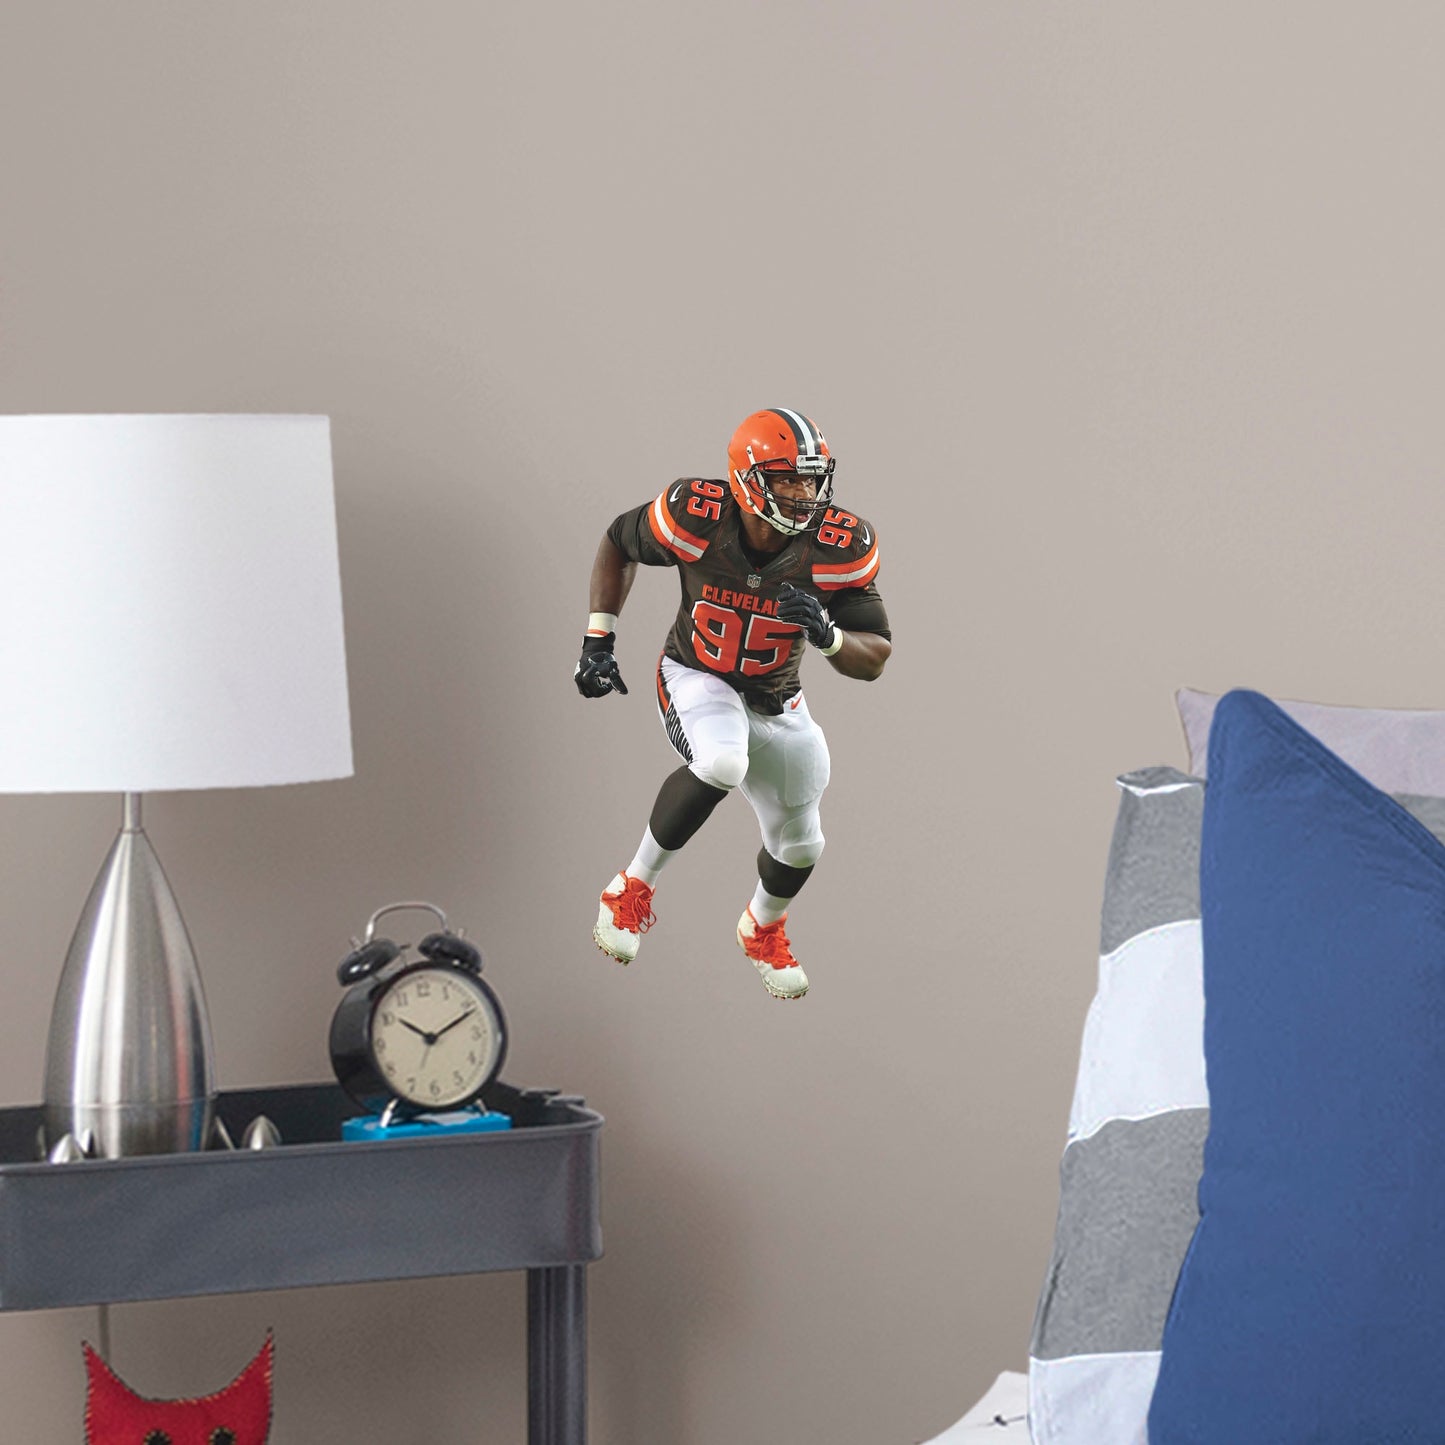 Large Athlete + 2 Decals (9"W x 16"H) Invite Cleveland Browns defensive end Myles Garrett to your personal Dawg Pound with this durable vinyl wall decal. The 2017 first-round draft pick and 2018 Pro Bowl qualifier brings his defensive skills to your bedroom, office, and dog-friendly man cave. Browns Backers will appreciate the classic brown, white, and Cleveland orange, but you don't have to stay in Cleveland. Take this easily reusable decal on the road to wherever life takes you.